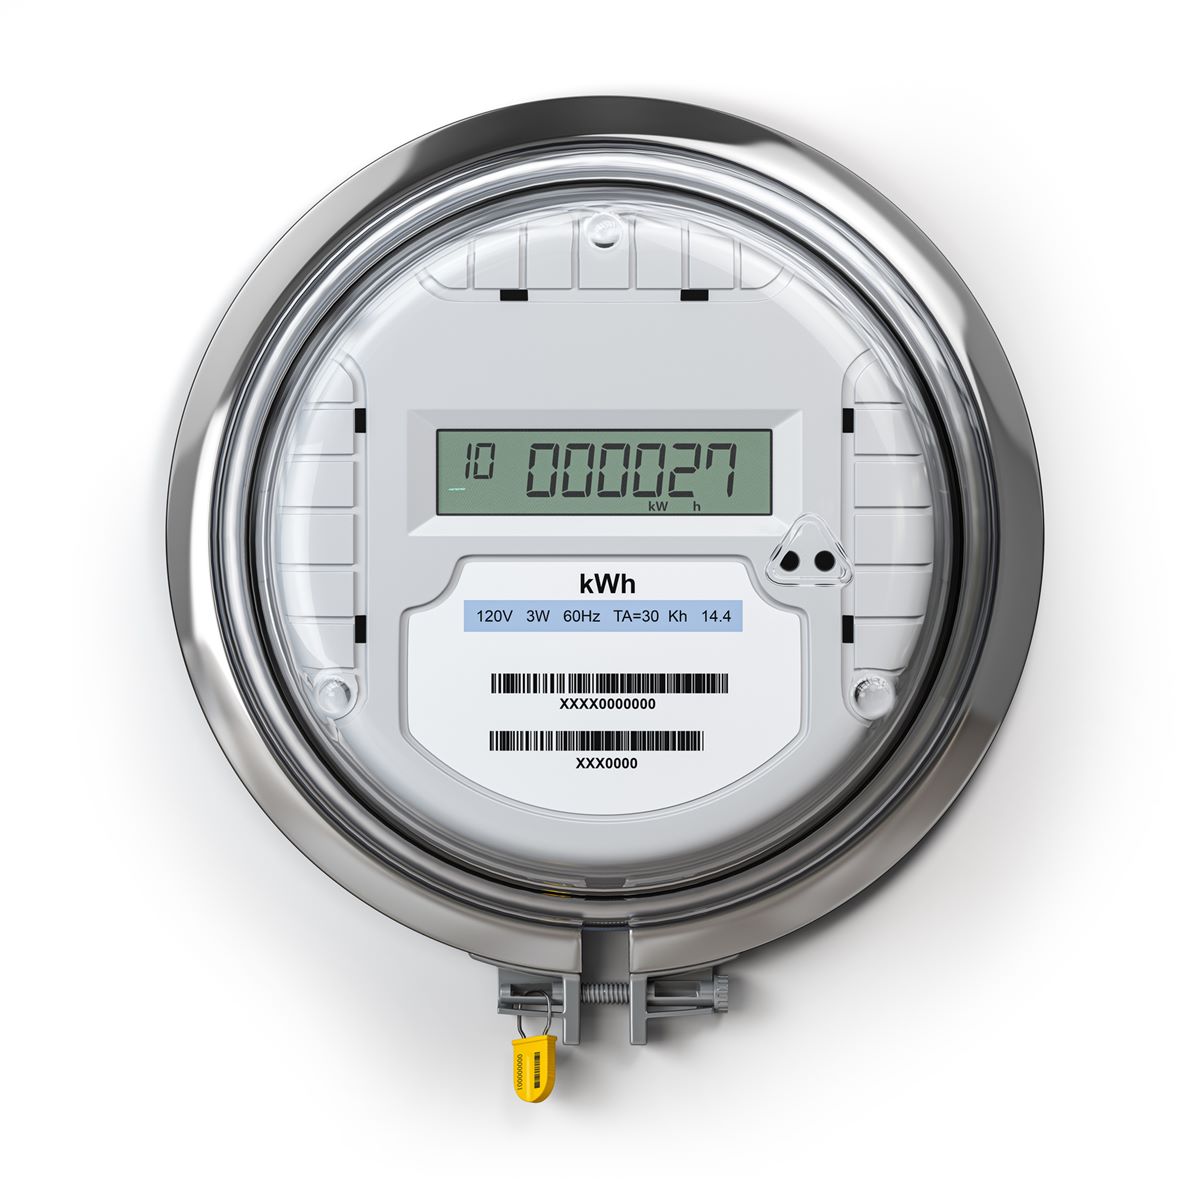 How To Read An Electric Meter With A Digital Display